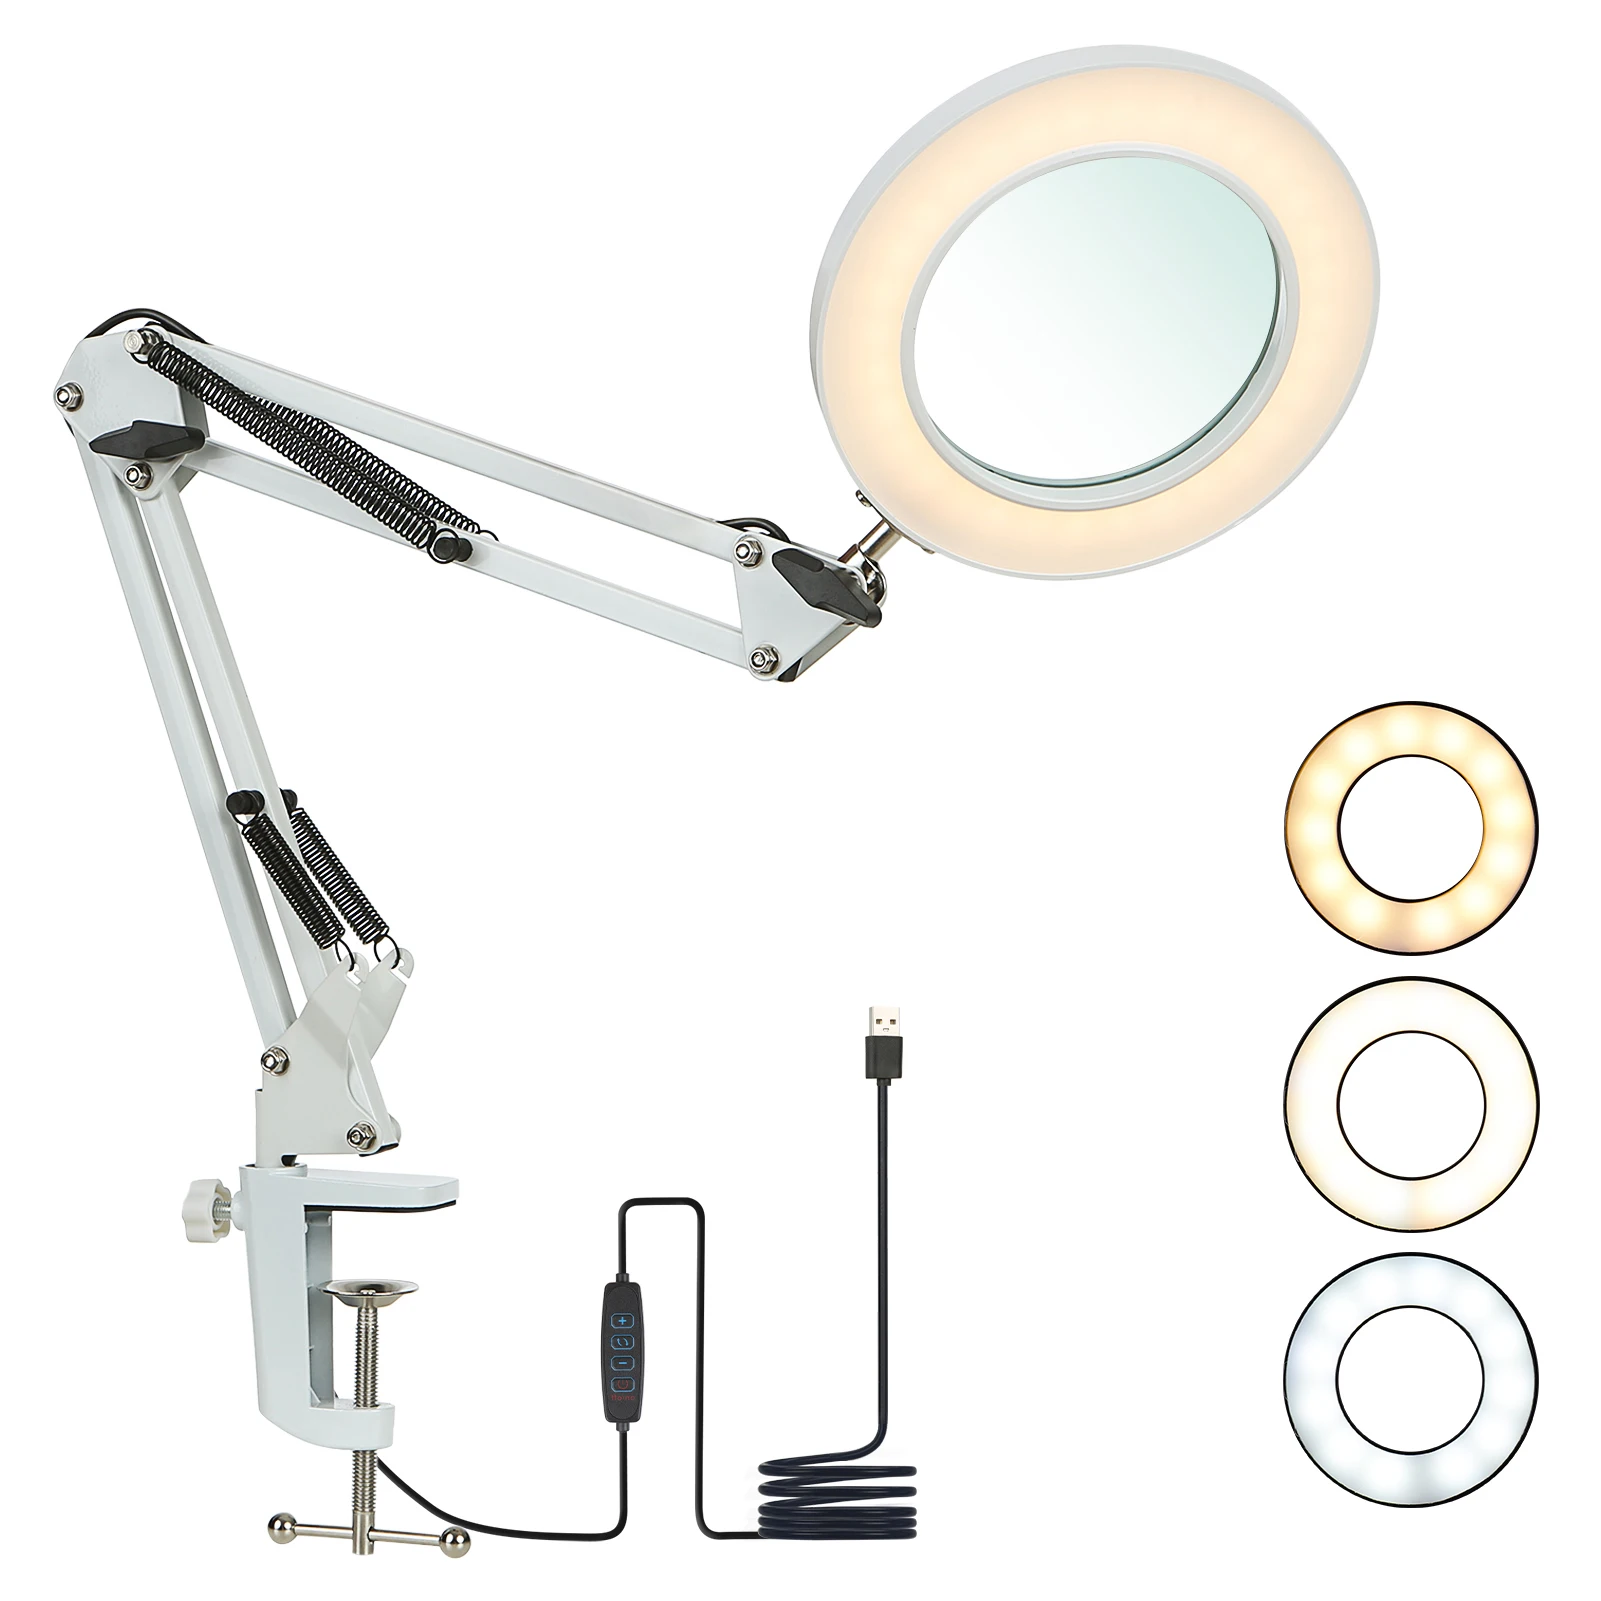 Tomshine Flexible Clamp-on Table Lamp with 8x Magnifier Swing Arm Dimmab... - $42.29+